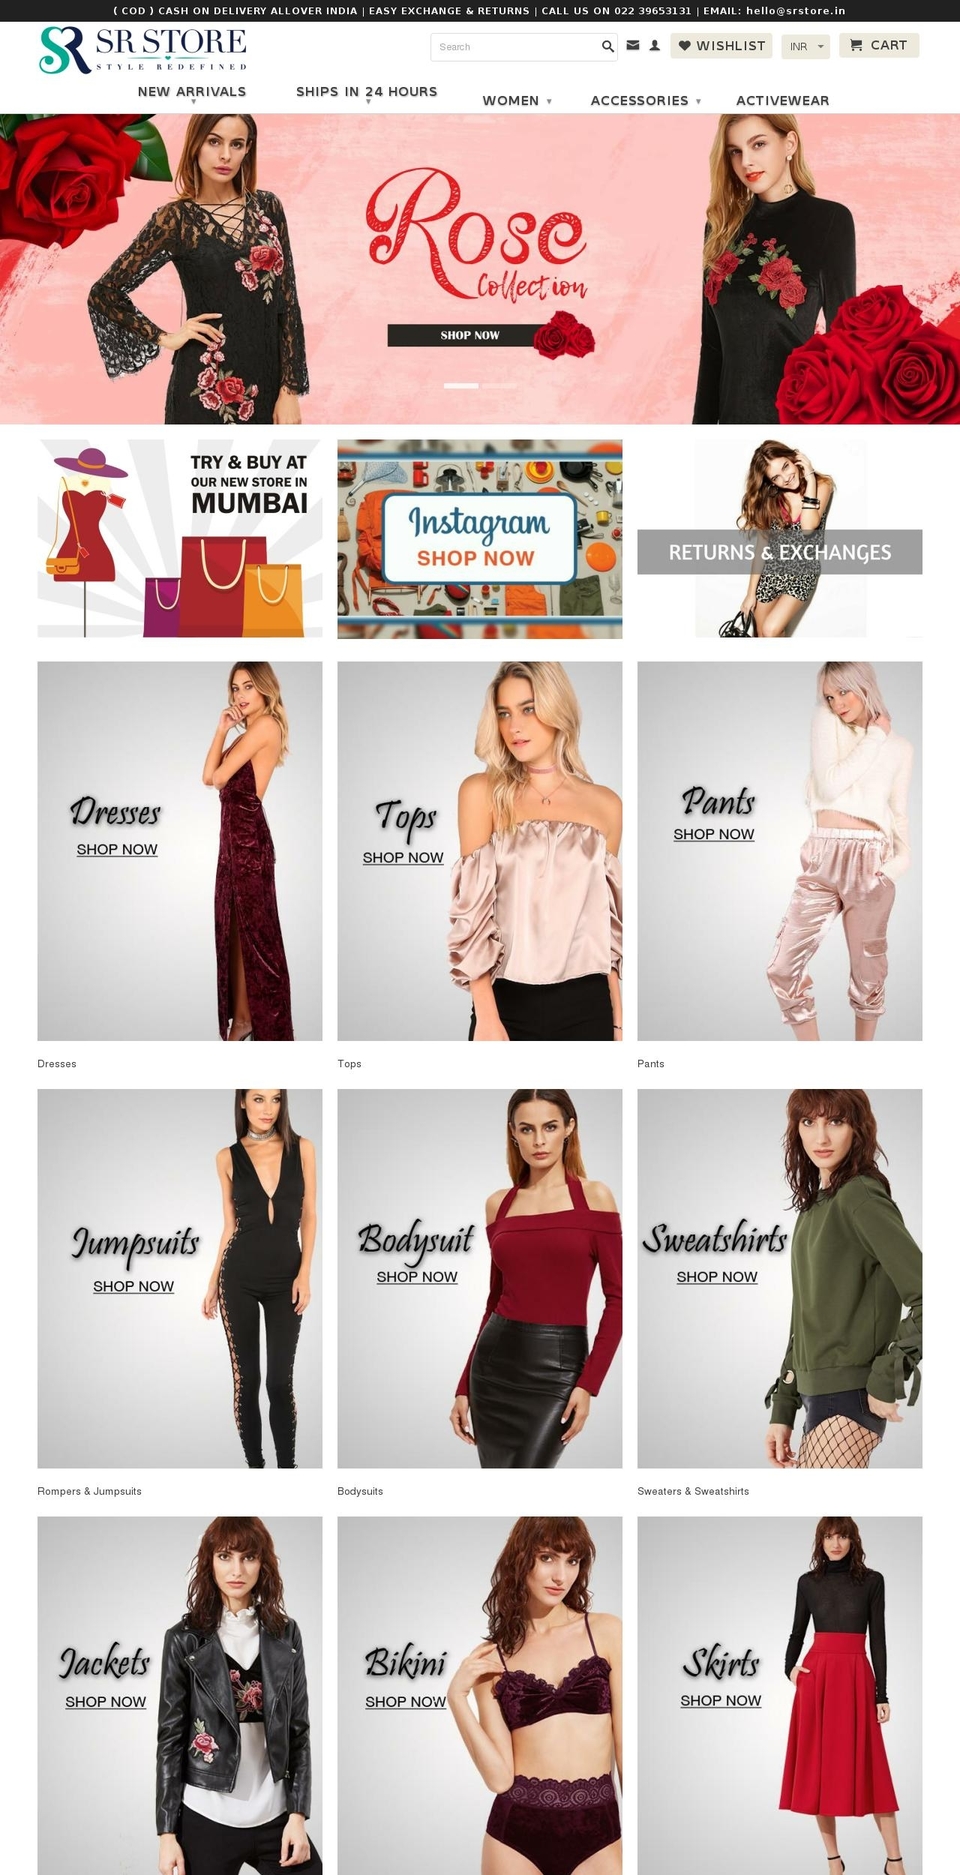 SearchTap  April | fastrr v latestucue SR Stor... Shopify theme site example srstore.in